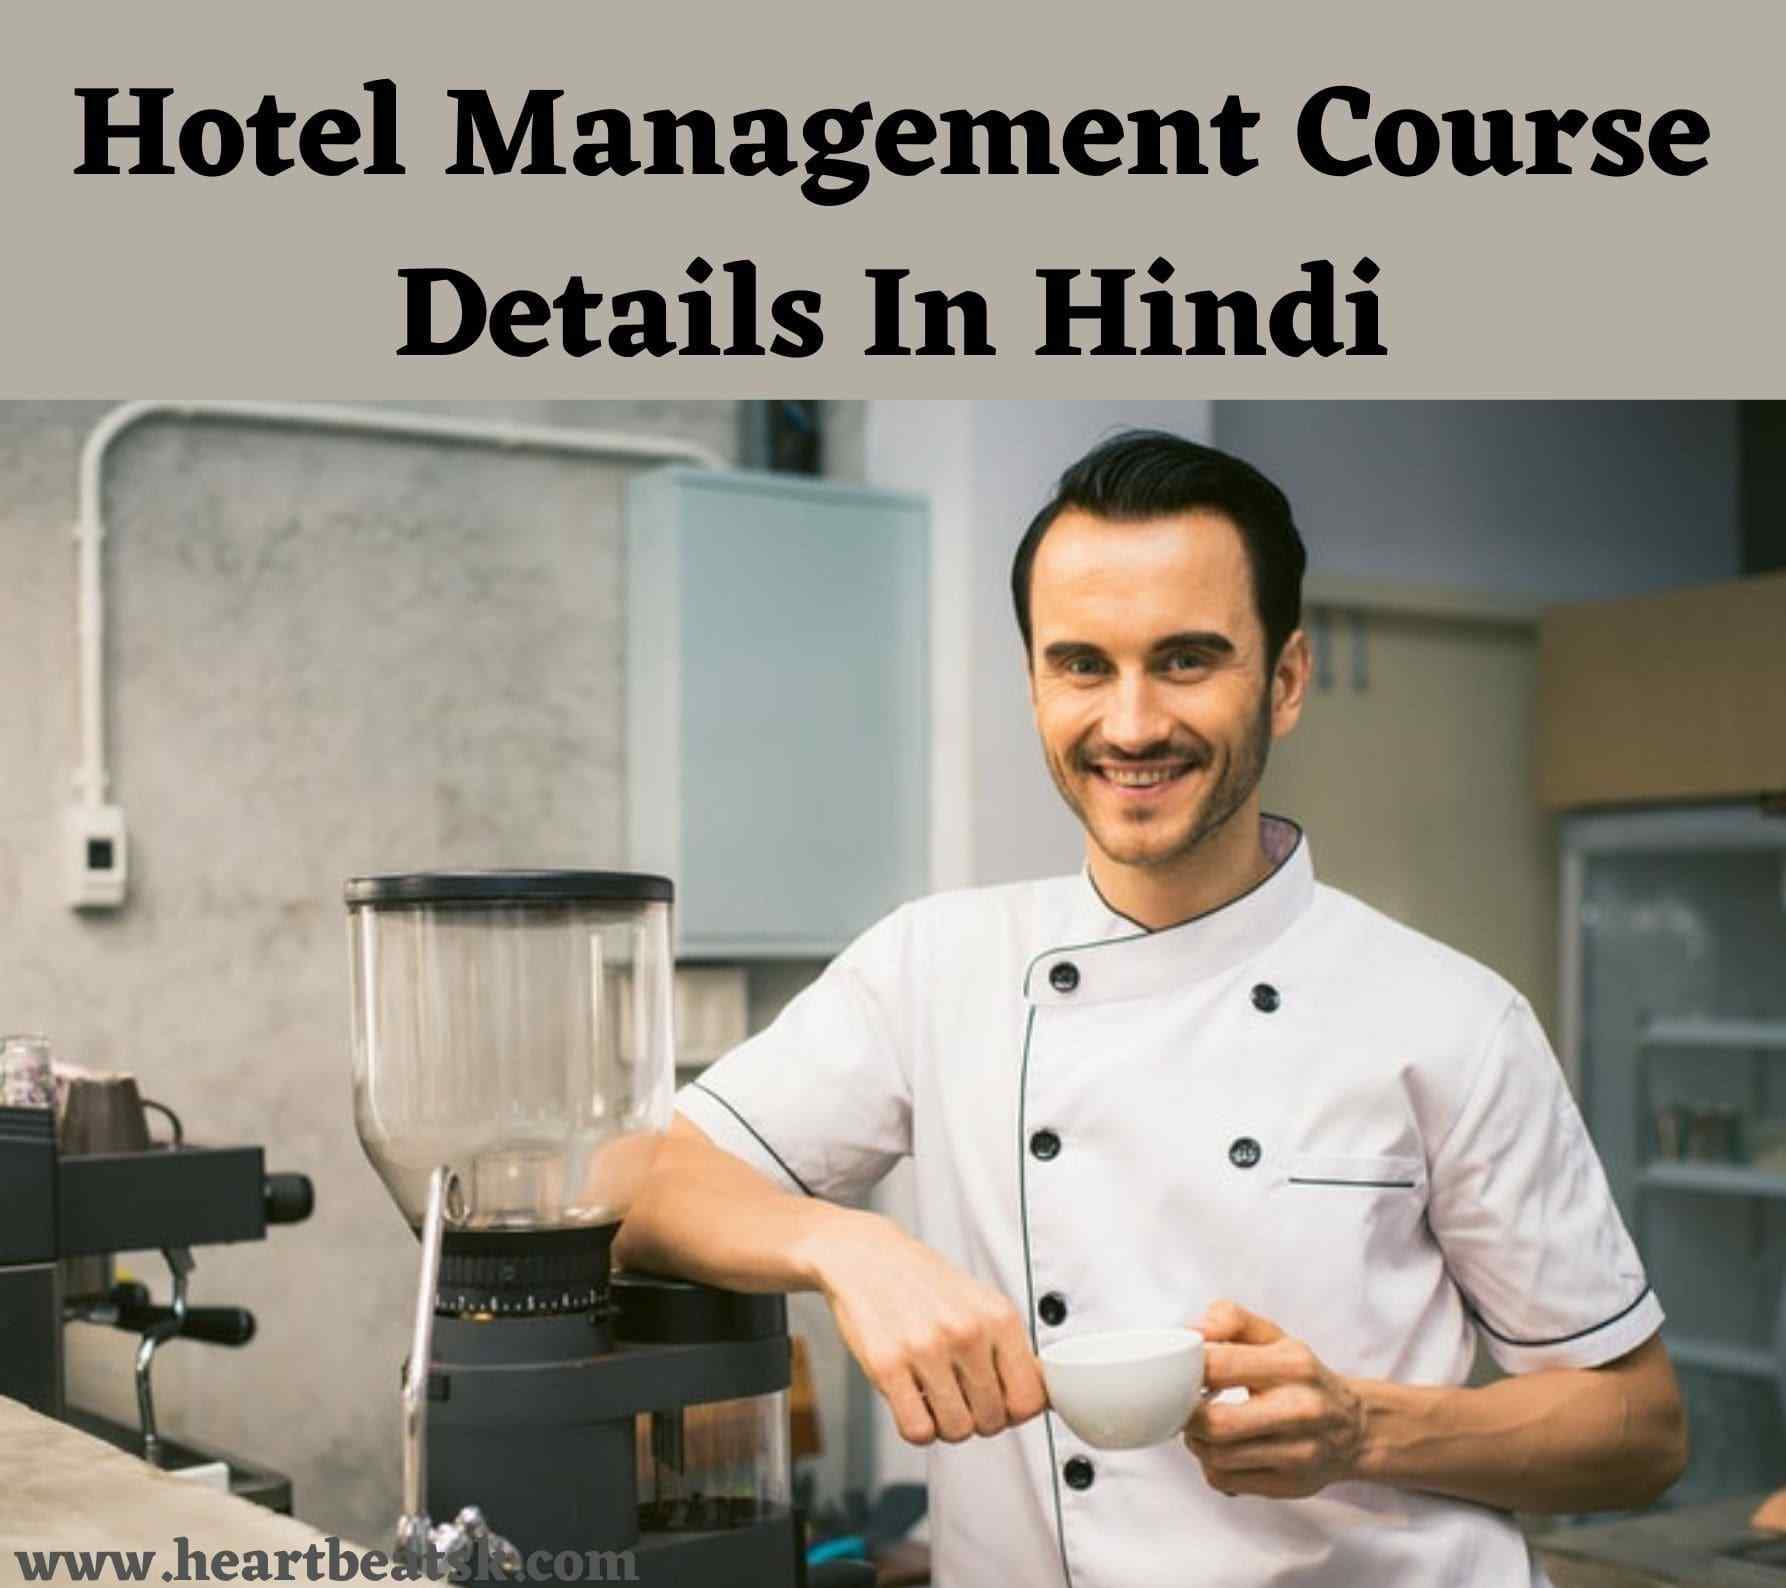 Hotel Management Course Details In Hindi